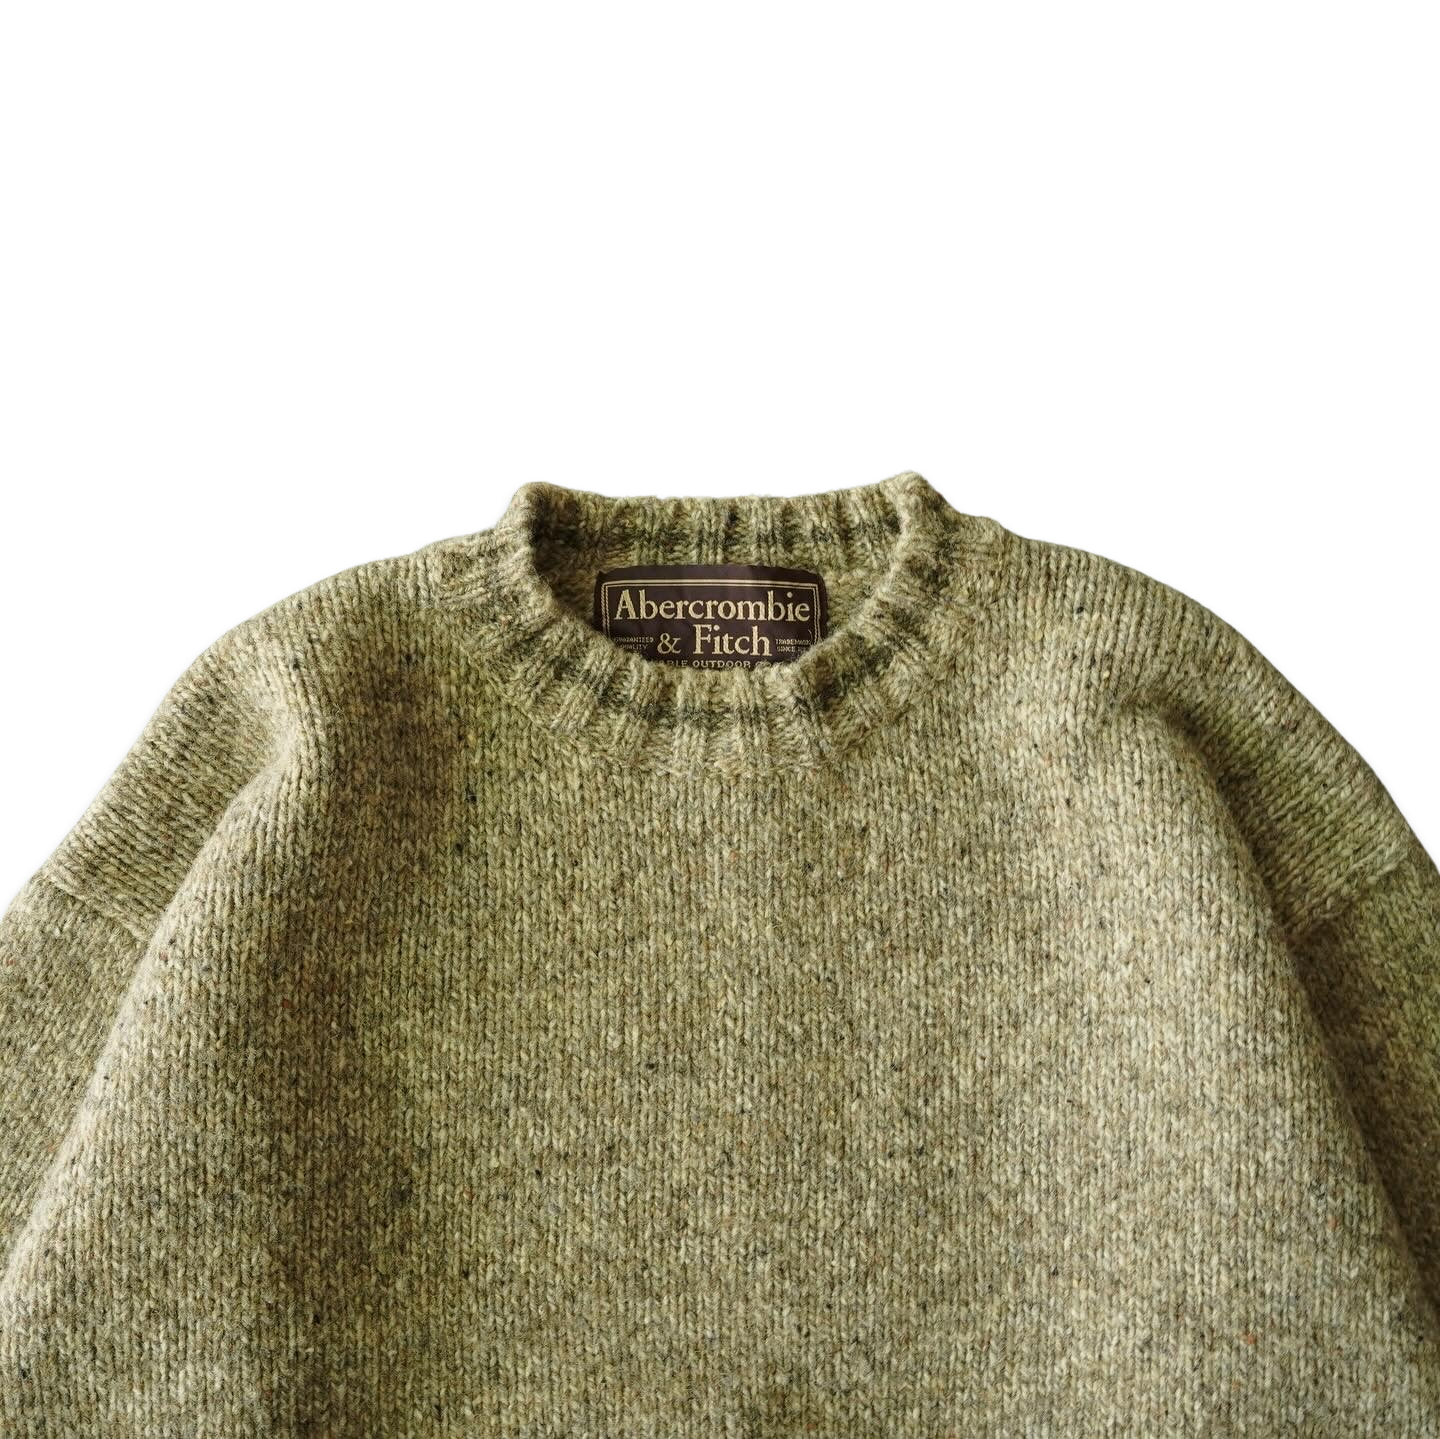 Abercrombie & Fitch Woo Knit Sweater